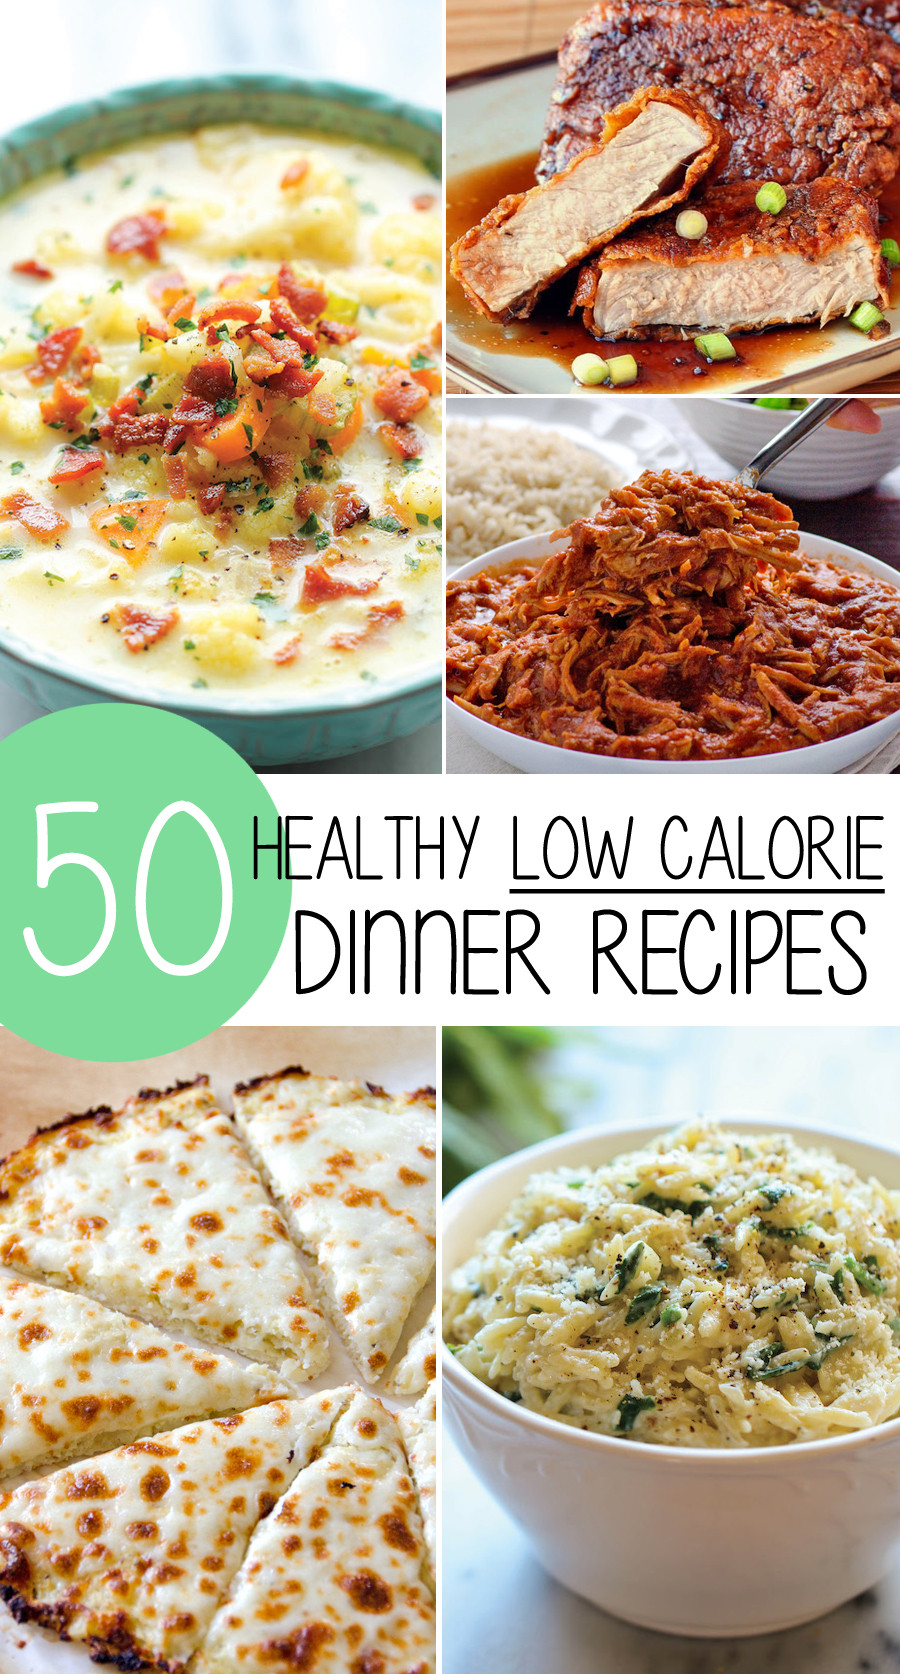 Weight Loss Meal Recipes
 50 Healthy Low Calorie Weight Loss Dinner Recipes